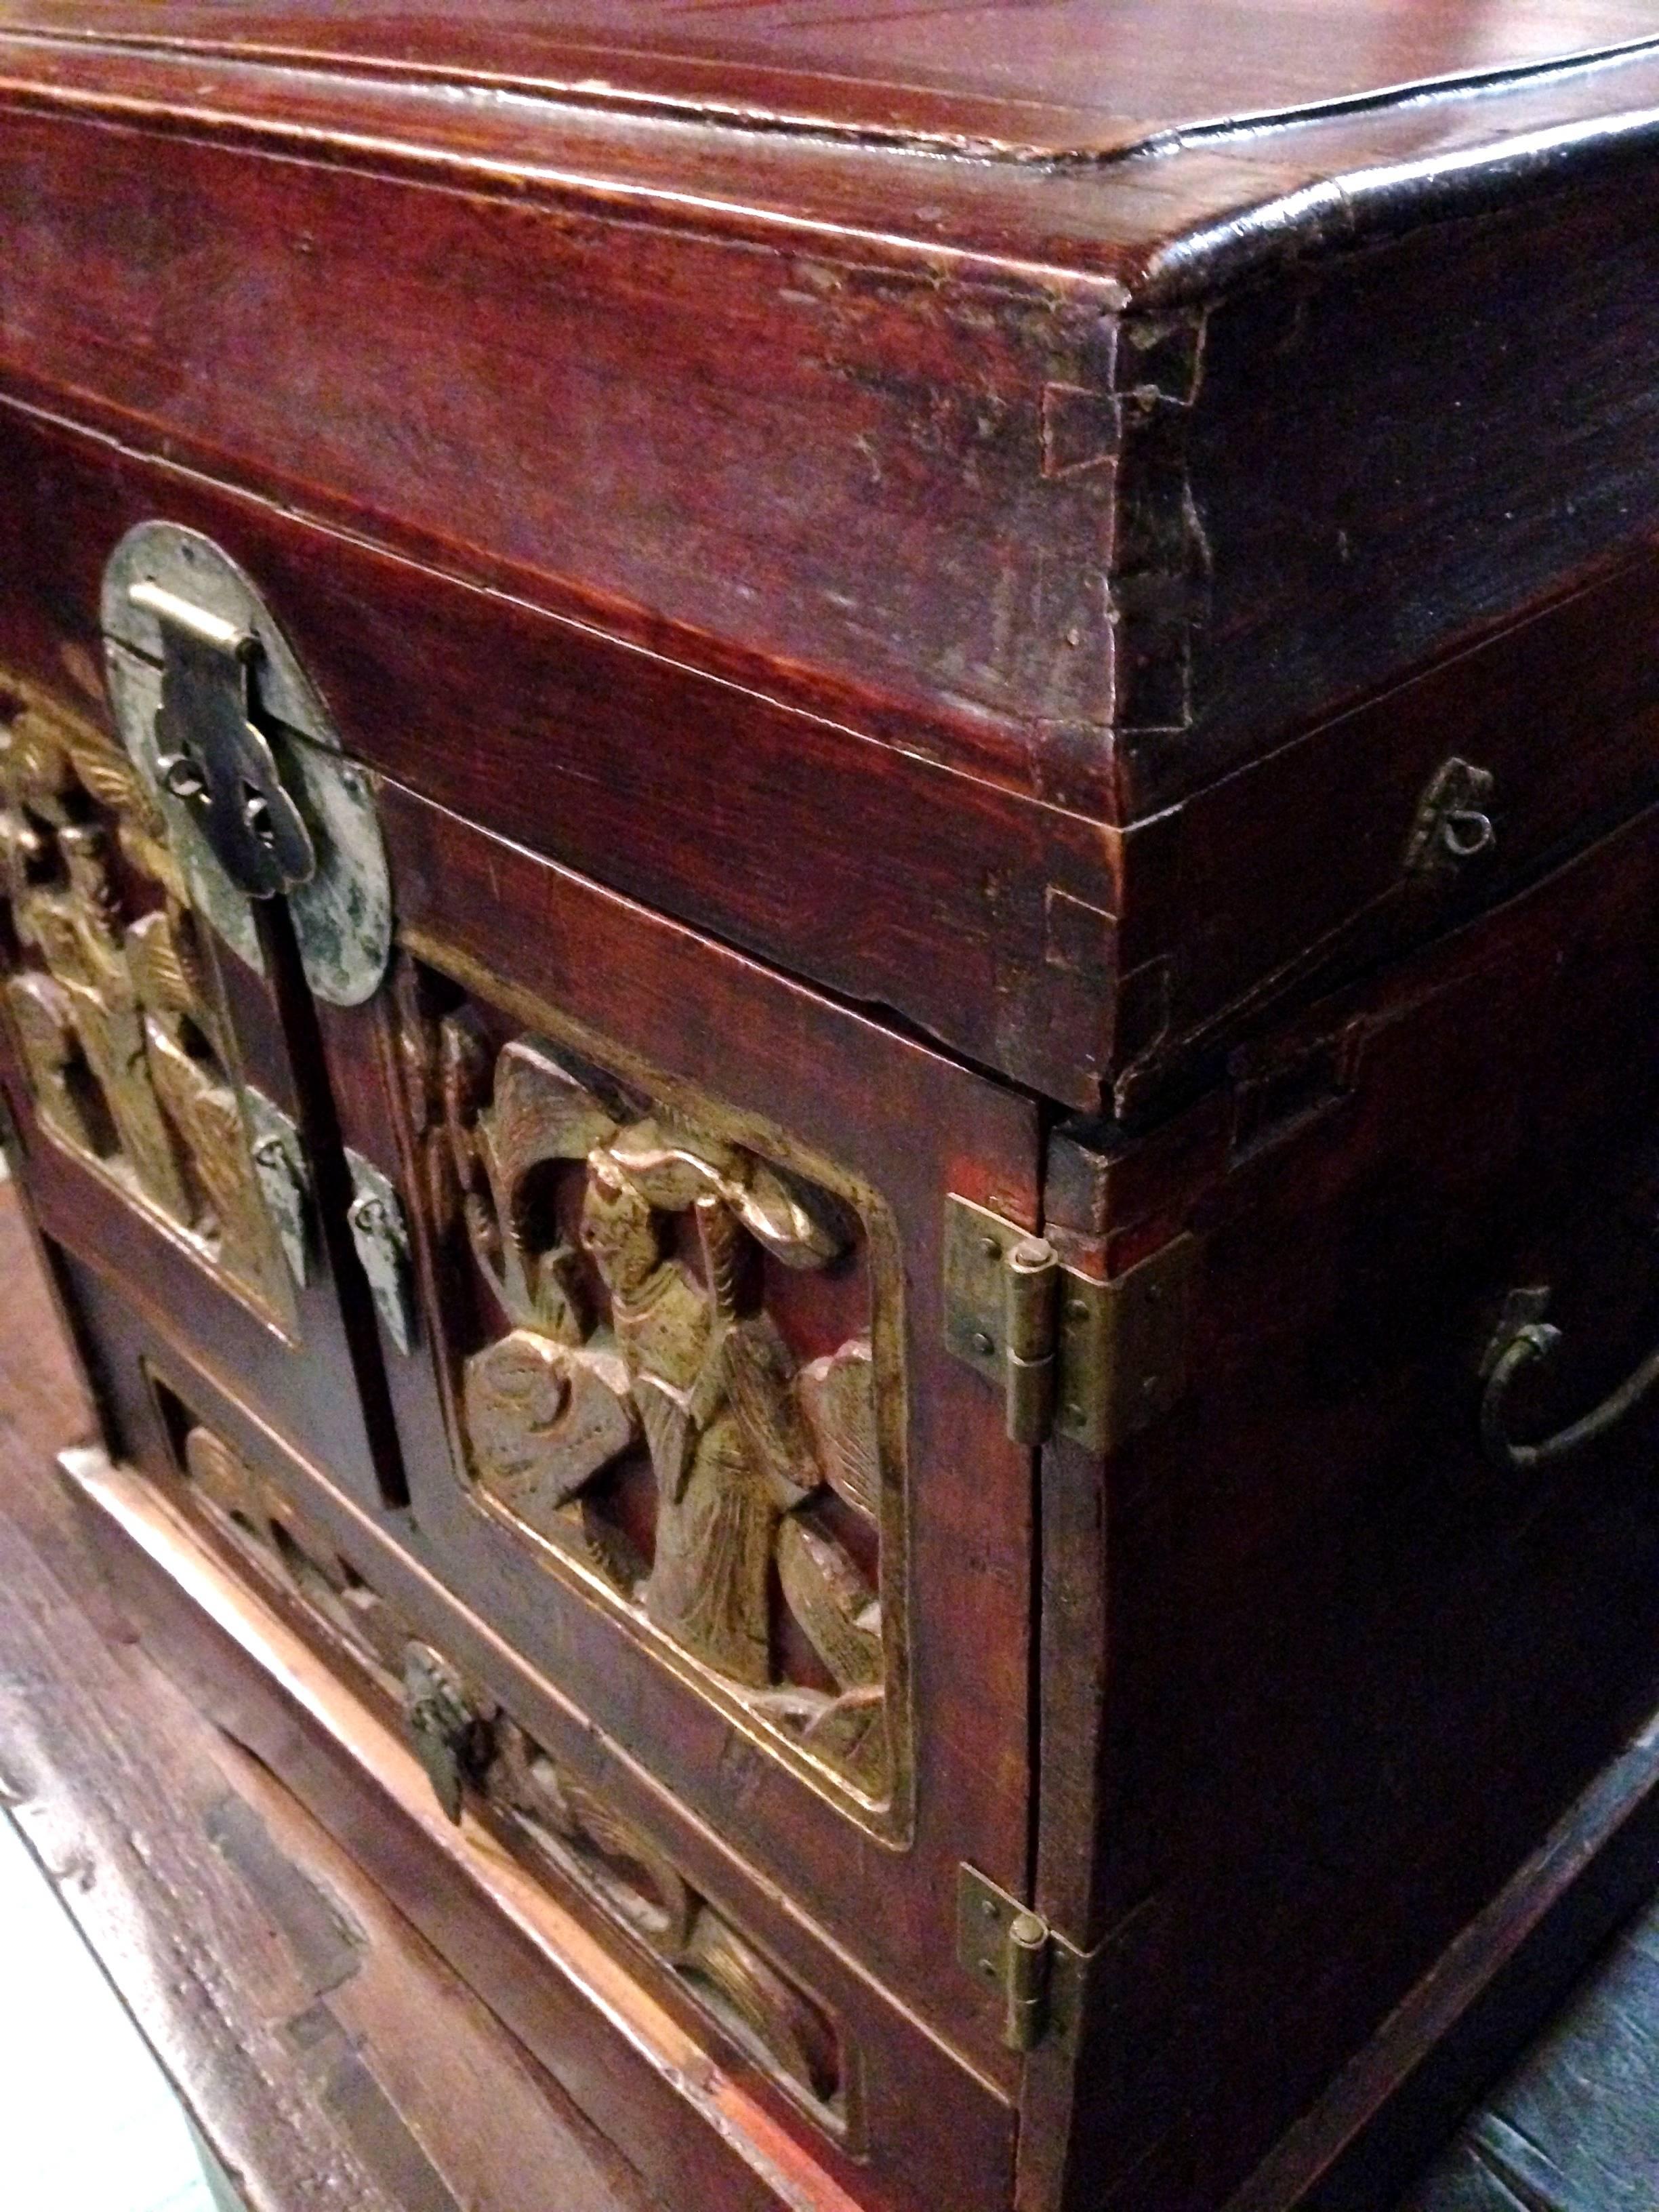 Beautiful 19th century jewelry box features four drawers and a space under the lid for storage. The most interesting is the tiny locking peg that discreetly locks the bottom drawer. Carved Harmony Gods on the doors symbolize peace and happiness.